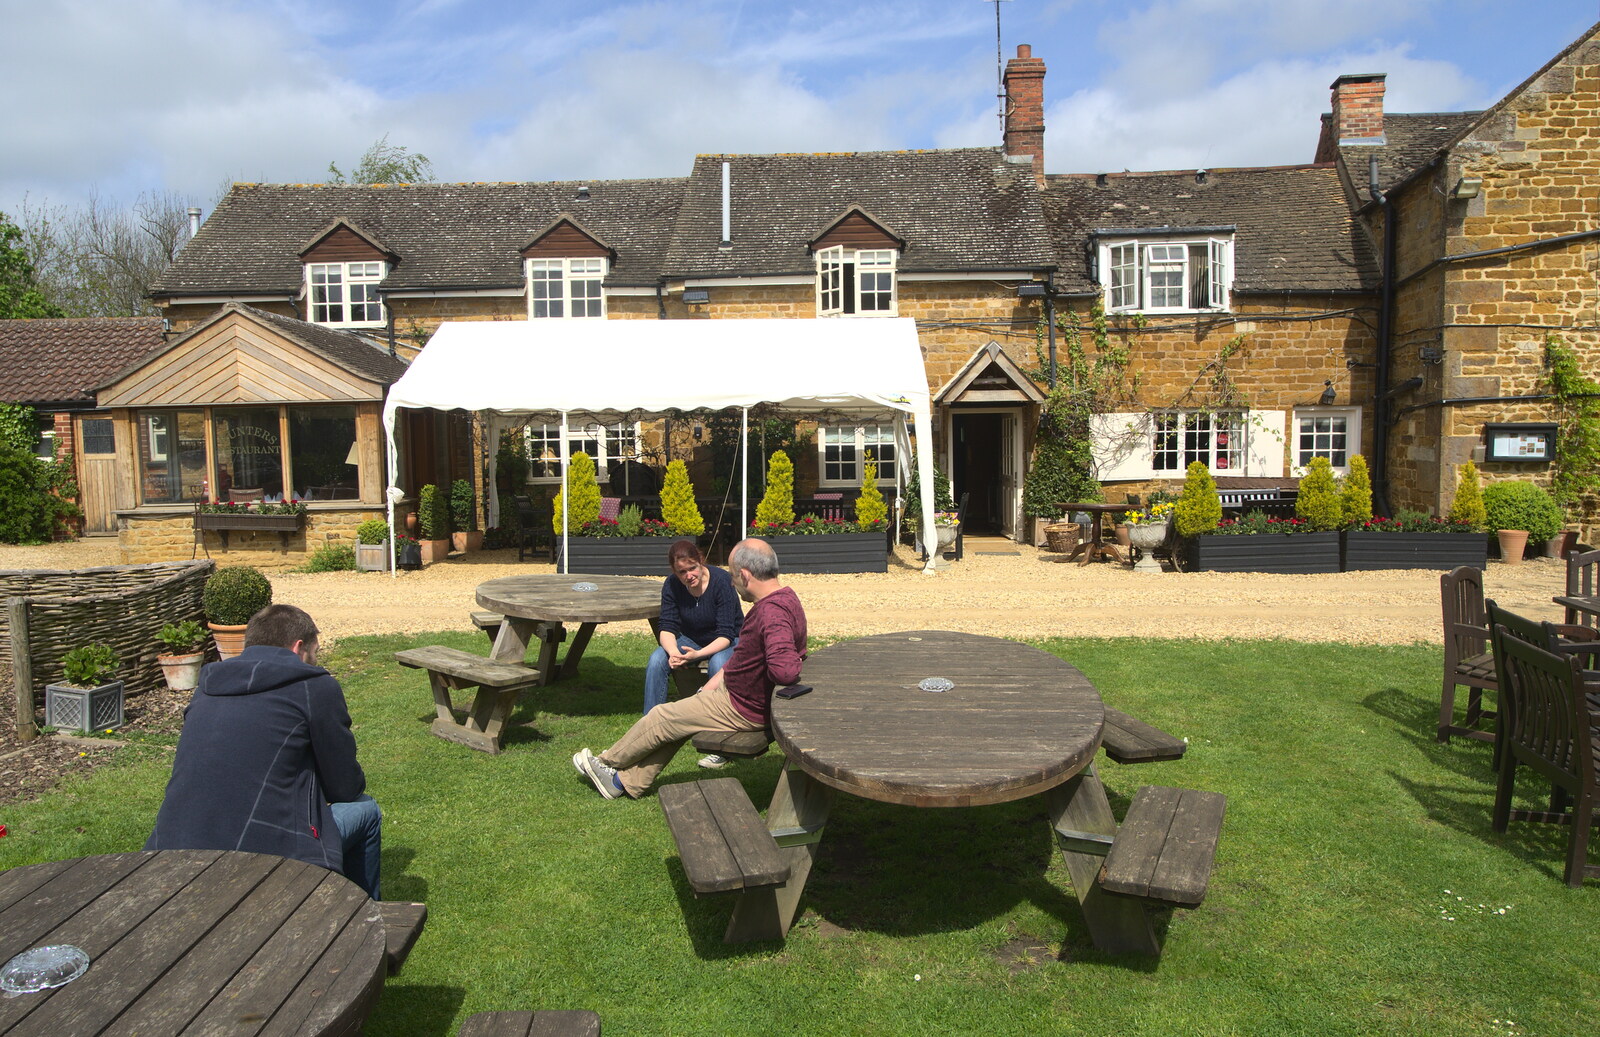 In the hotel's beer garden from The BSCC Weekend Away, Lyddington, Rutland - 9th May 2015